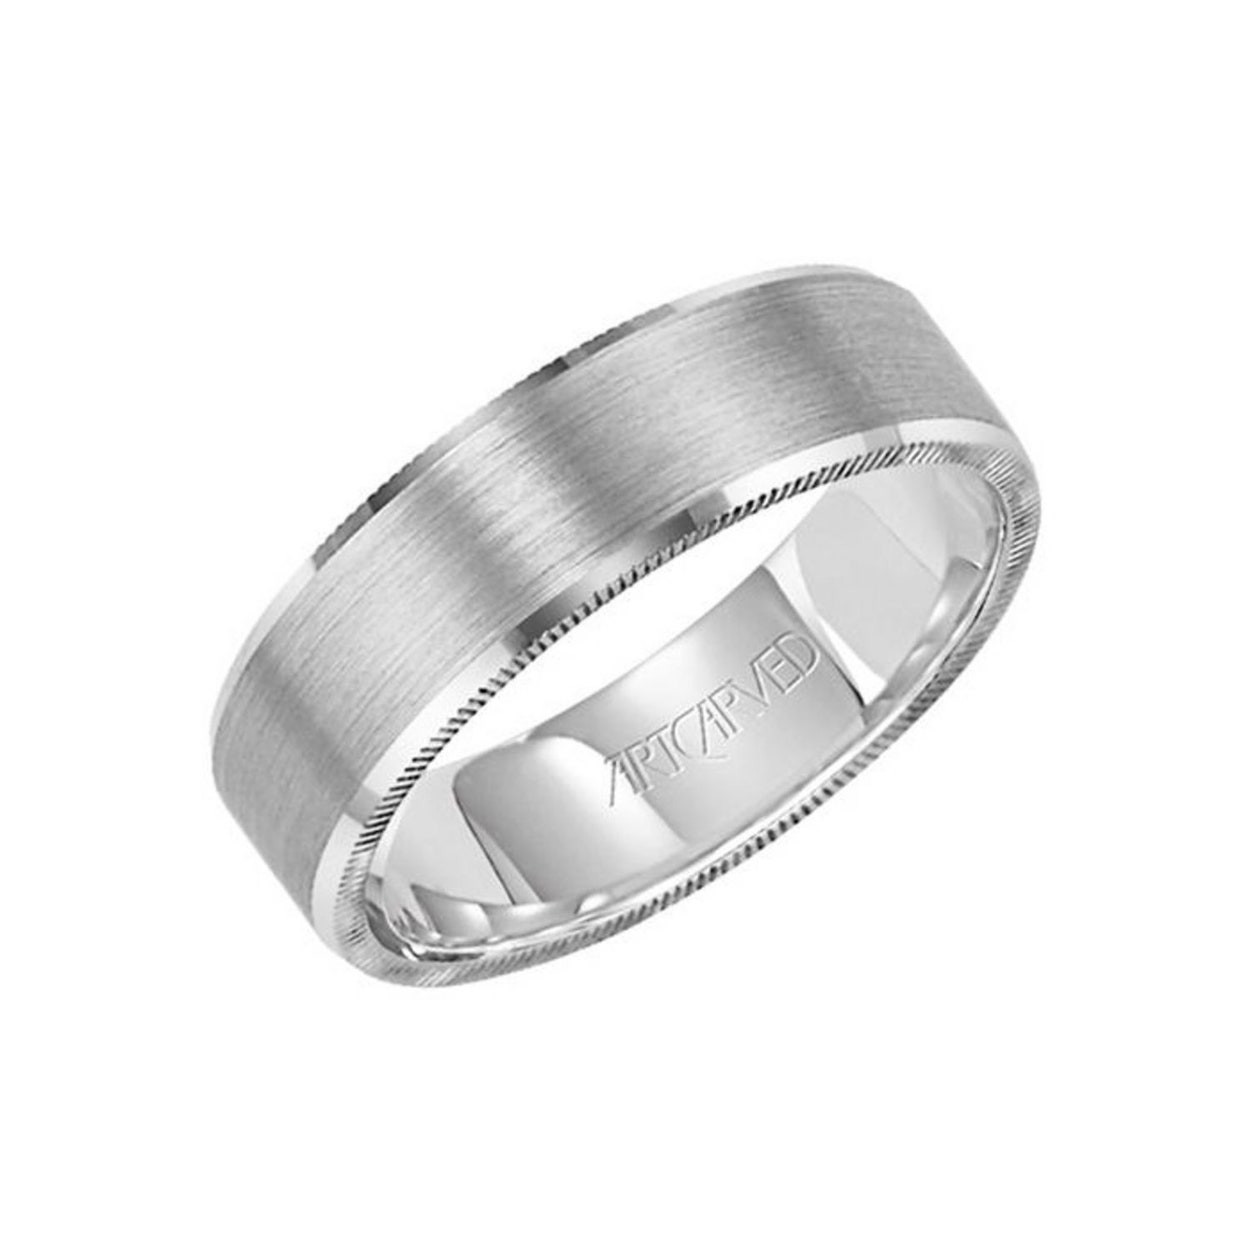 Expensive Mens Wedding Bands
 15 Men s Wedding Bands Your Groom Won t Want to Take f